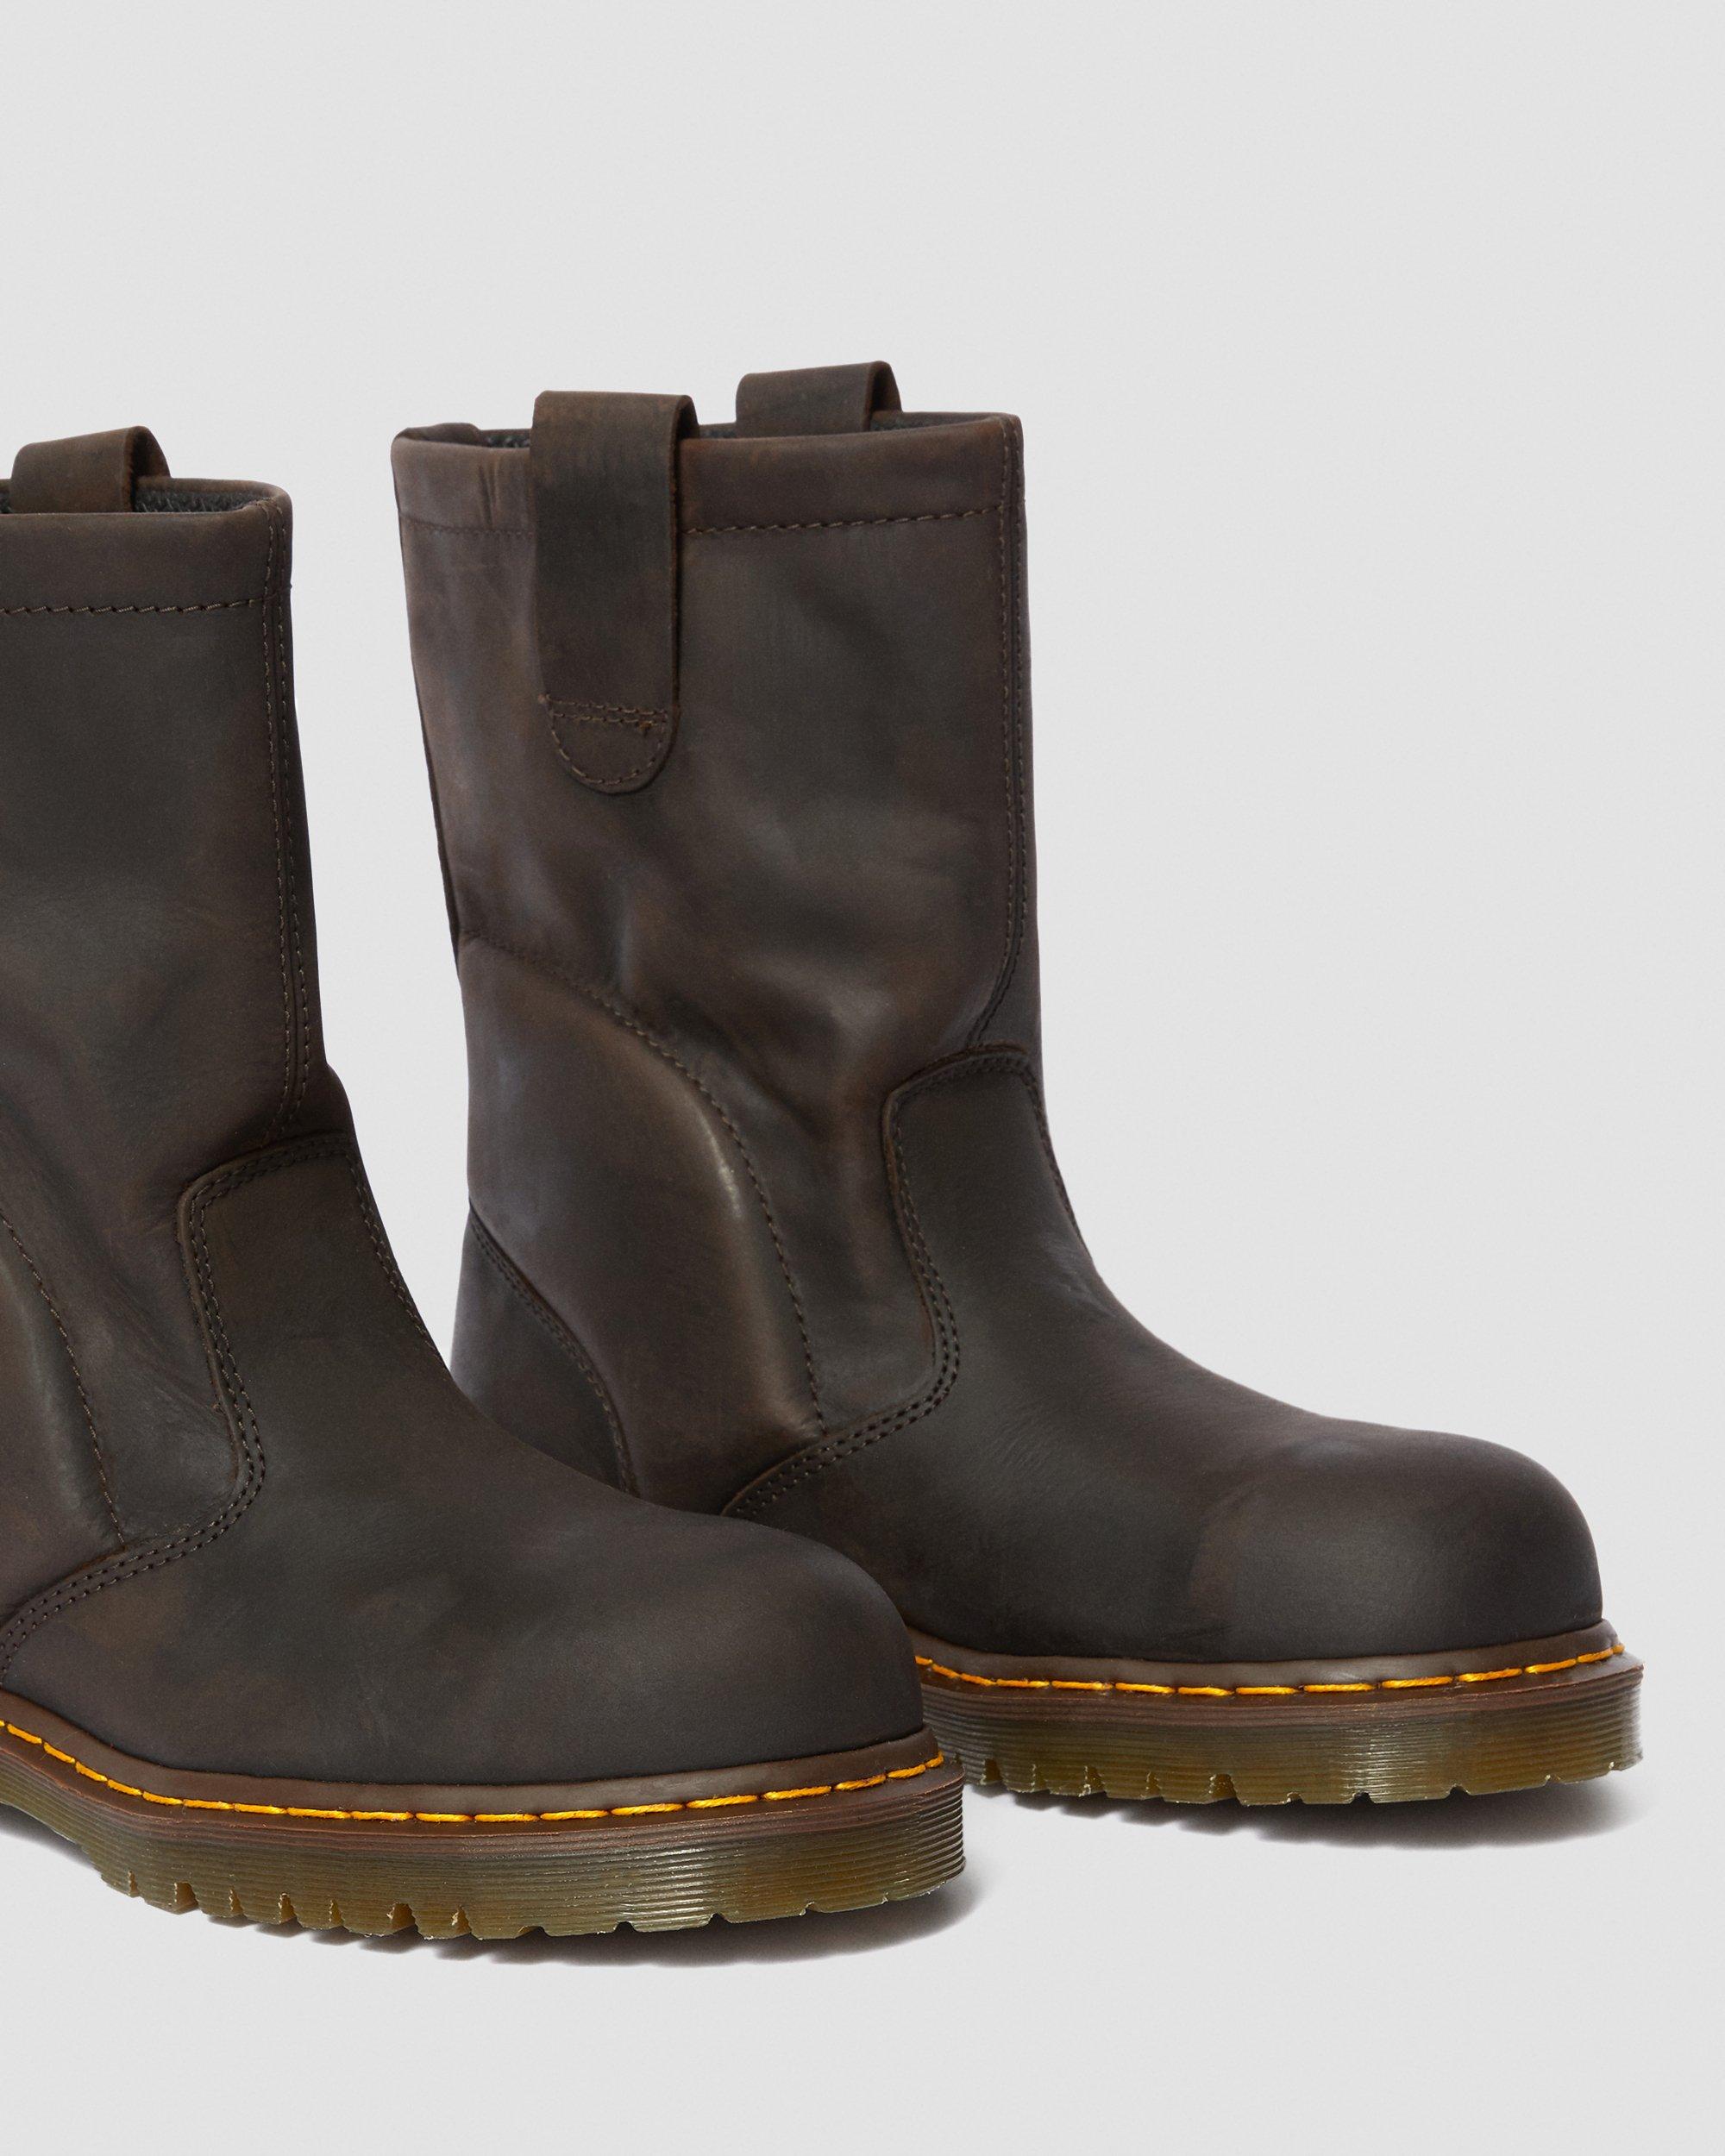 2295 EXTRA WIDE LEATHER SLIP ON WORK BOOTS | Dr. Martens Official